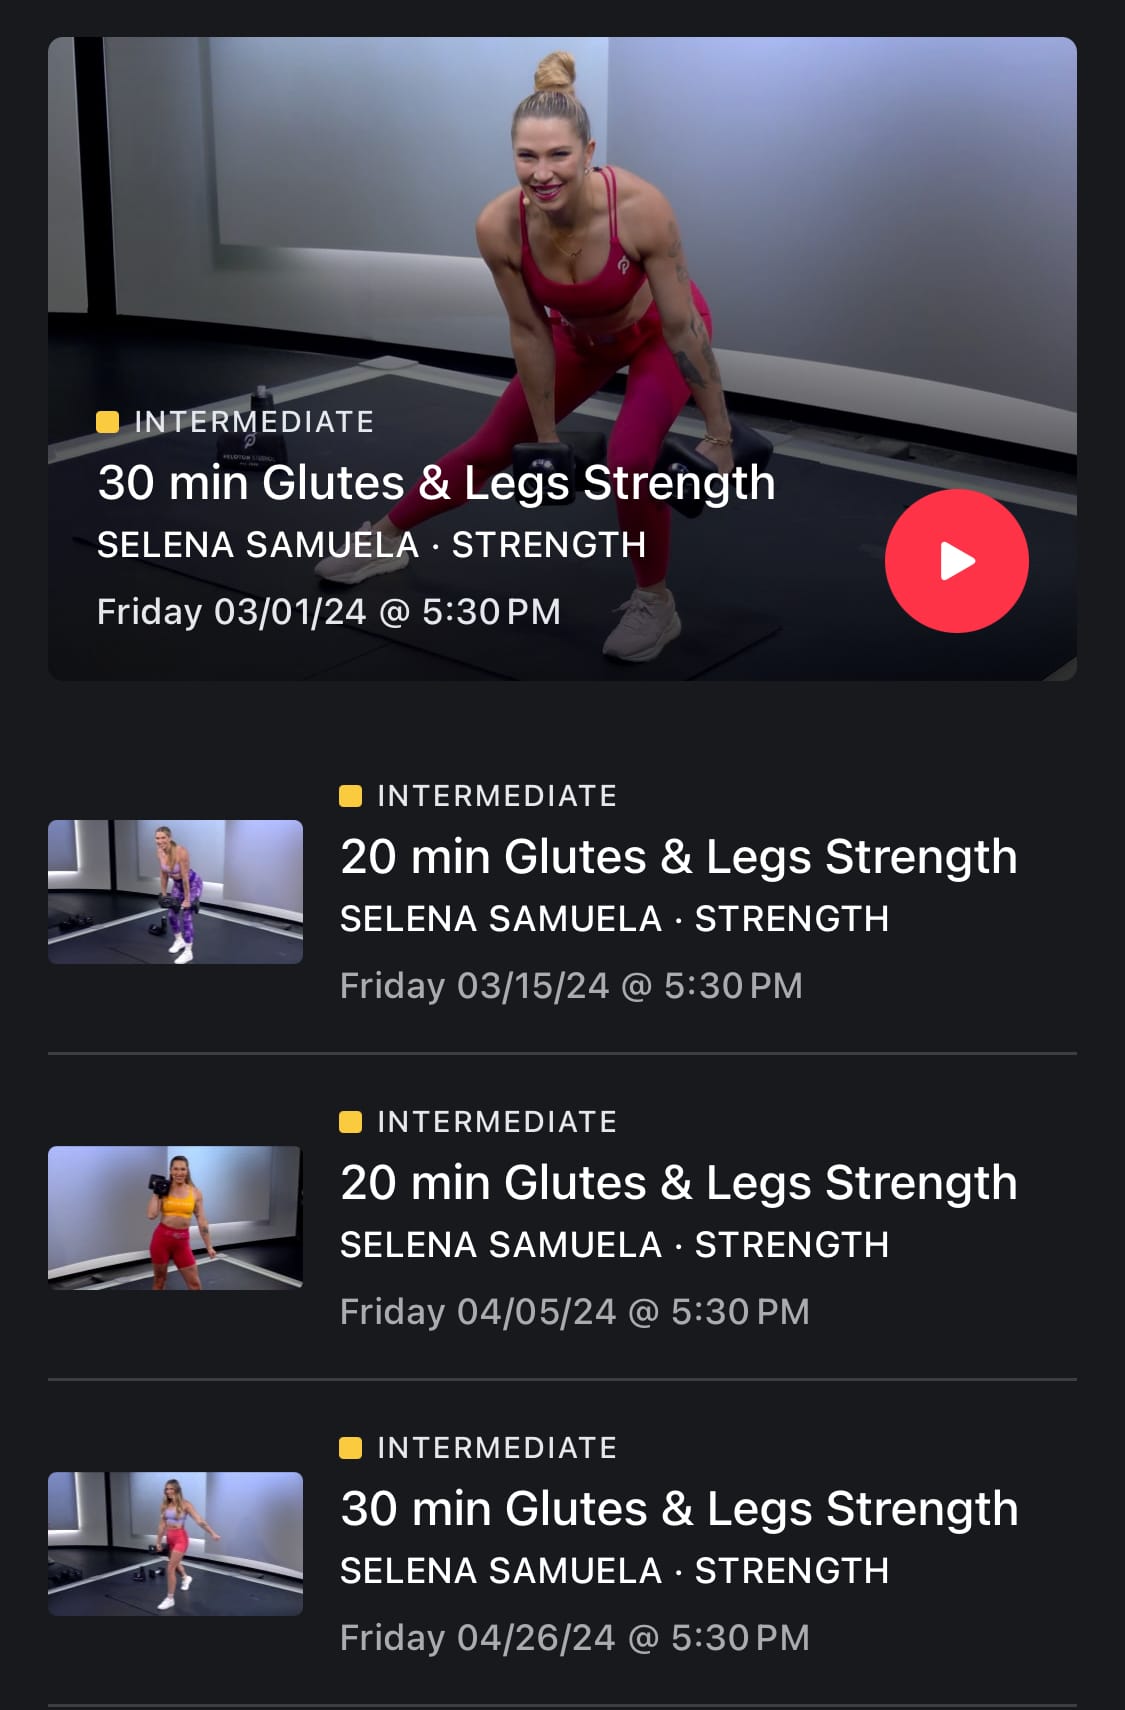 Class stack of Selena's Power 4 Glutes & Legs classes